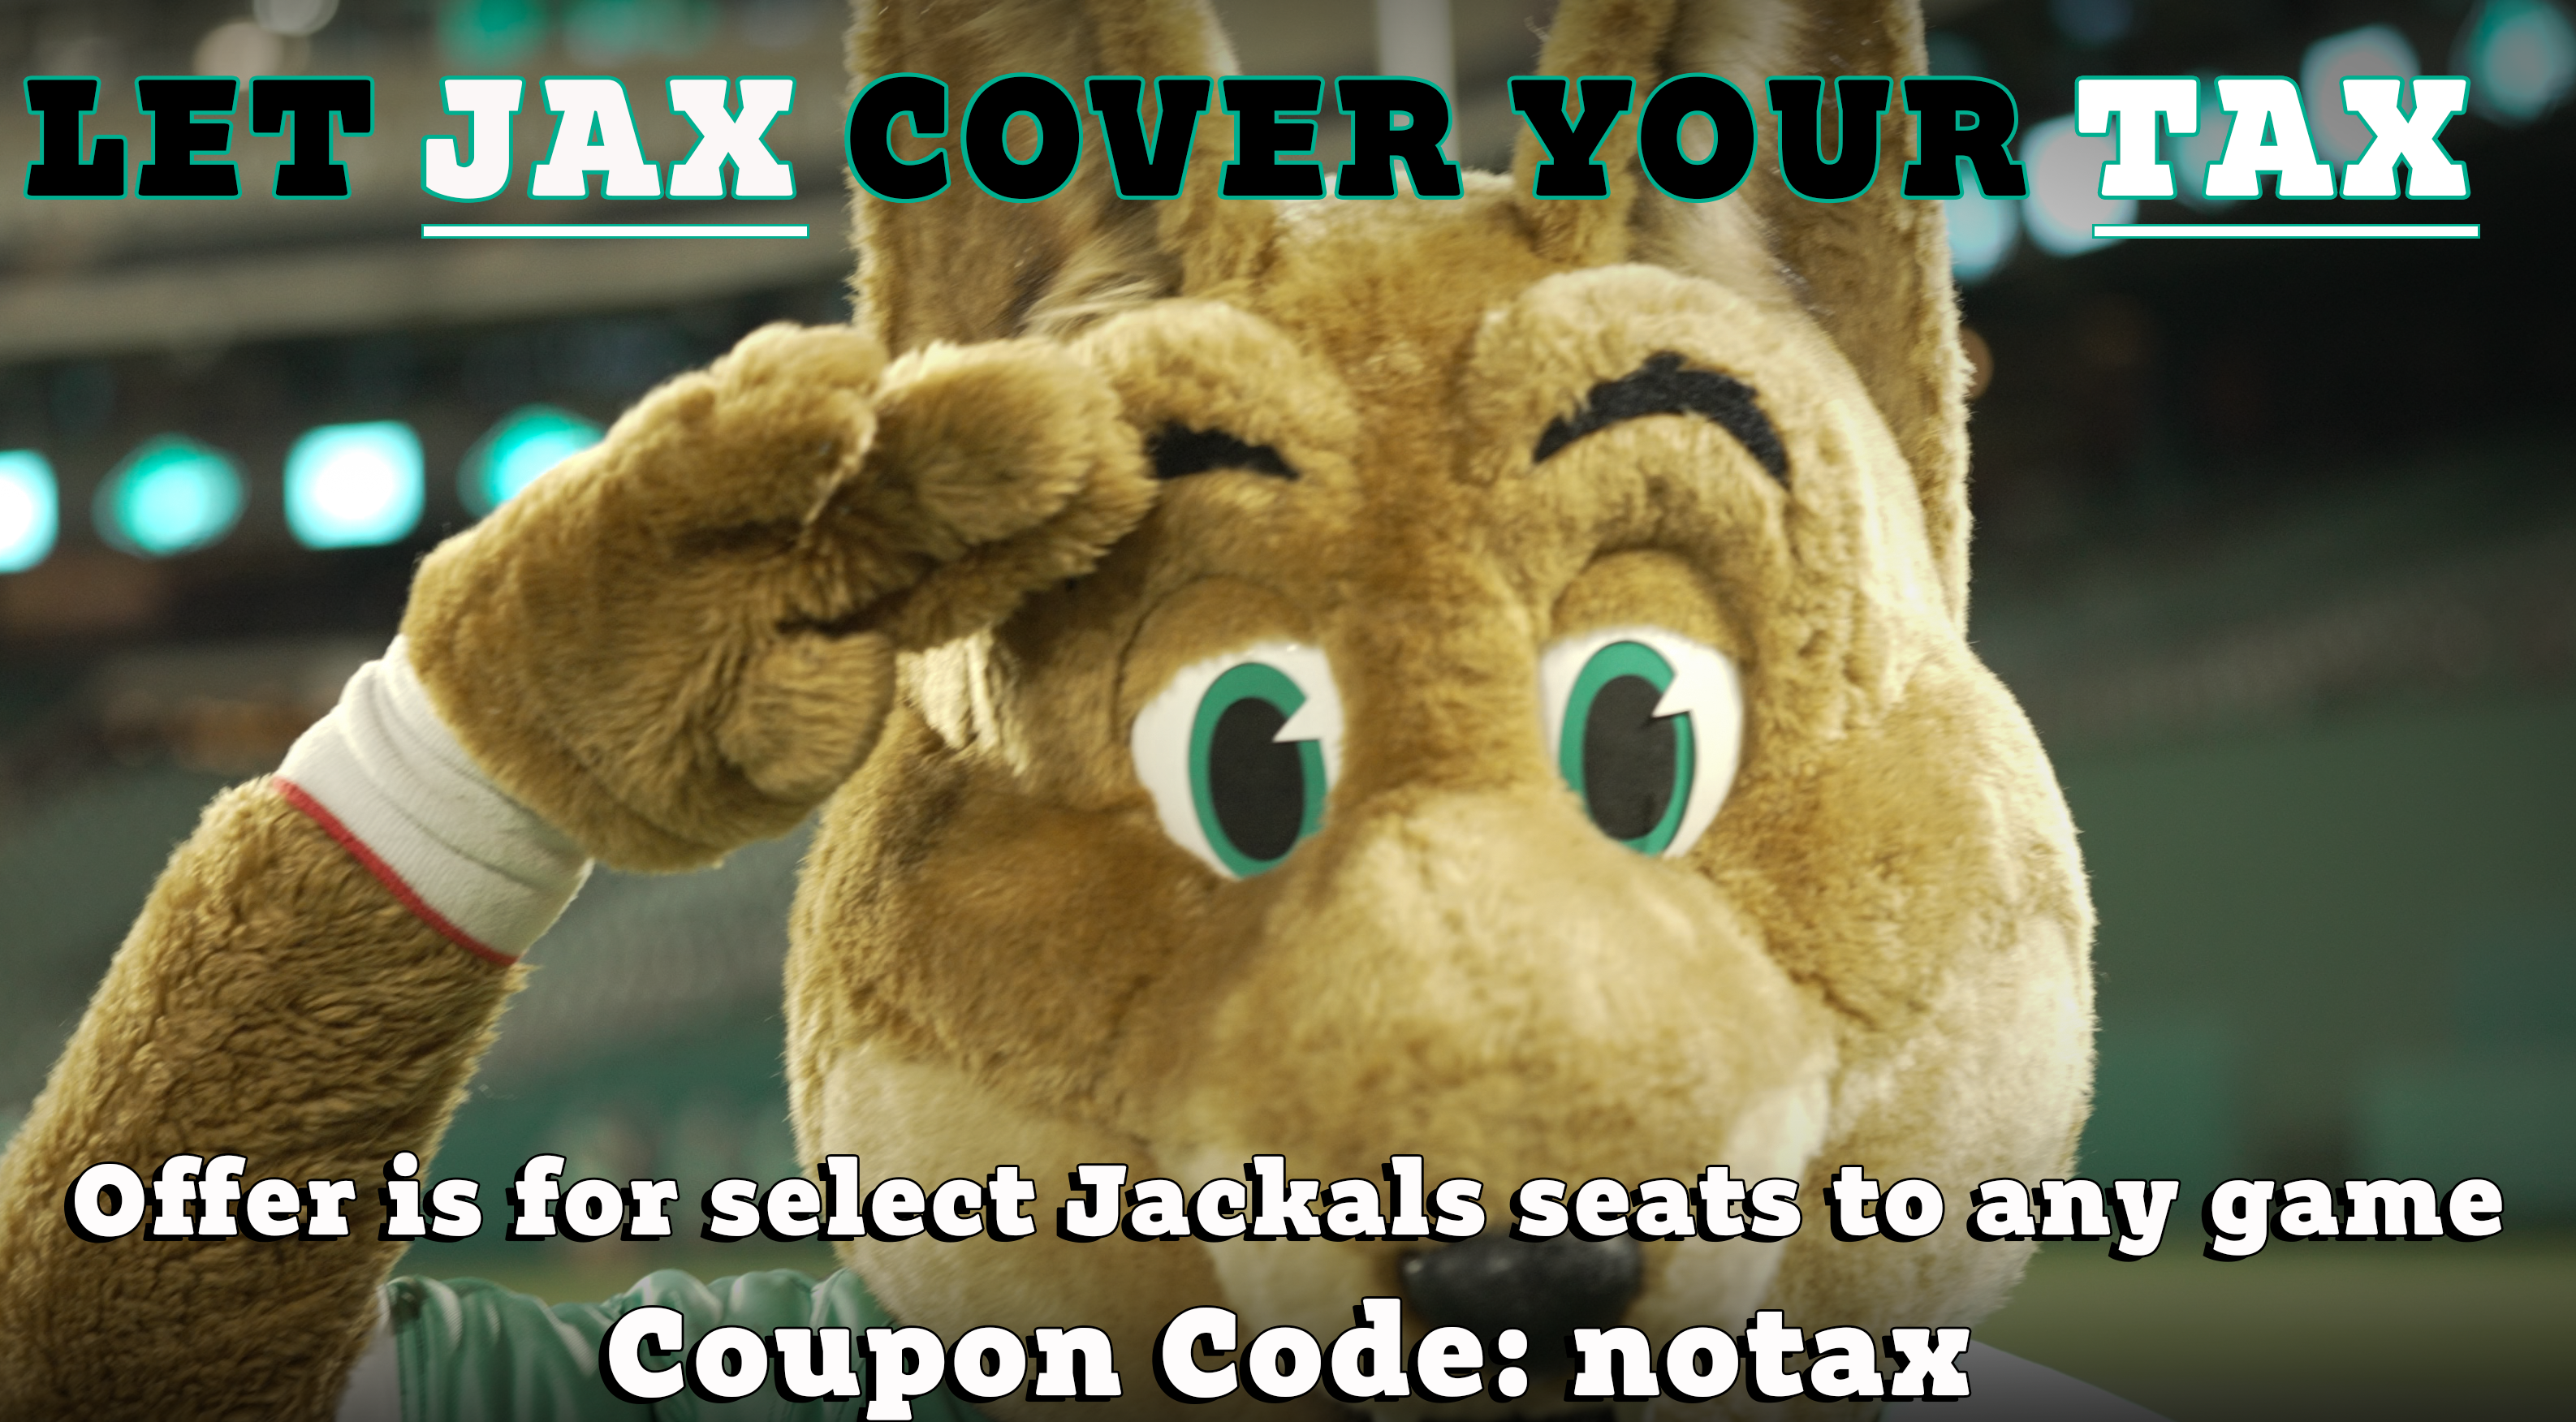 LET JAX COVER YOUR TAX!